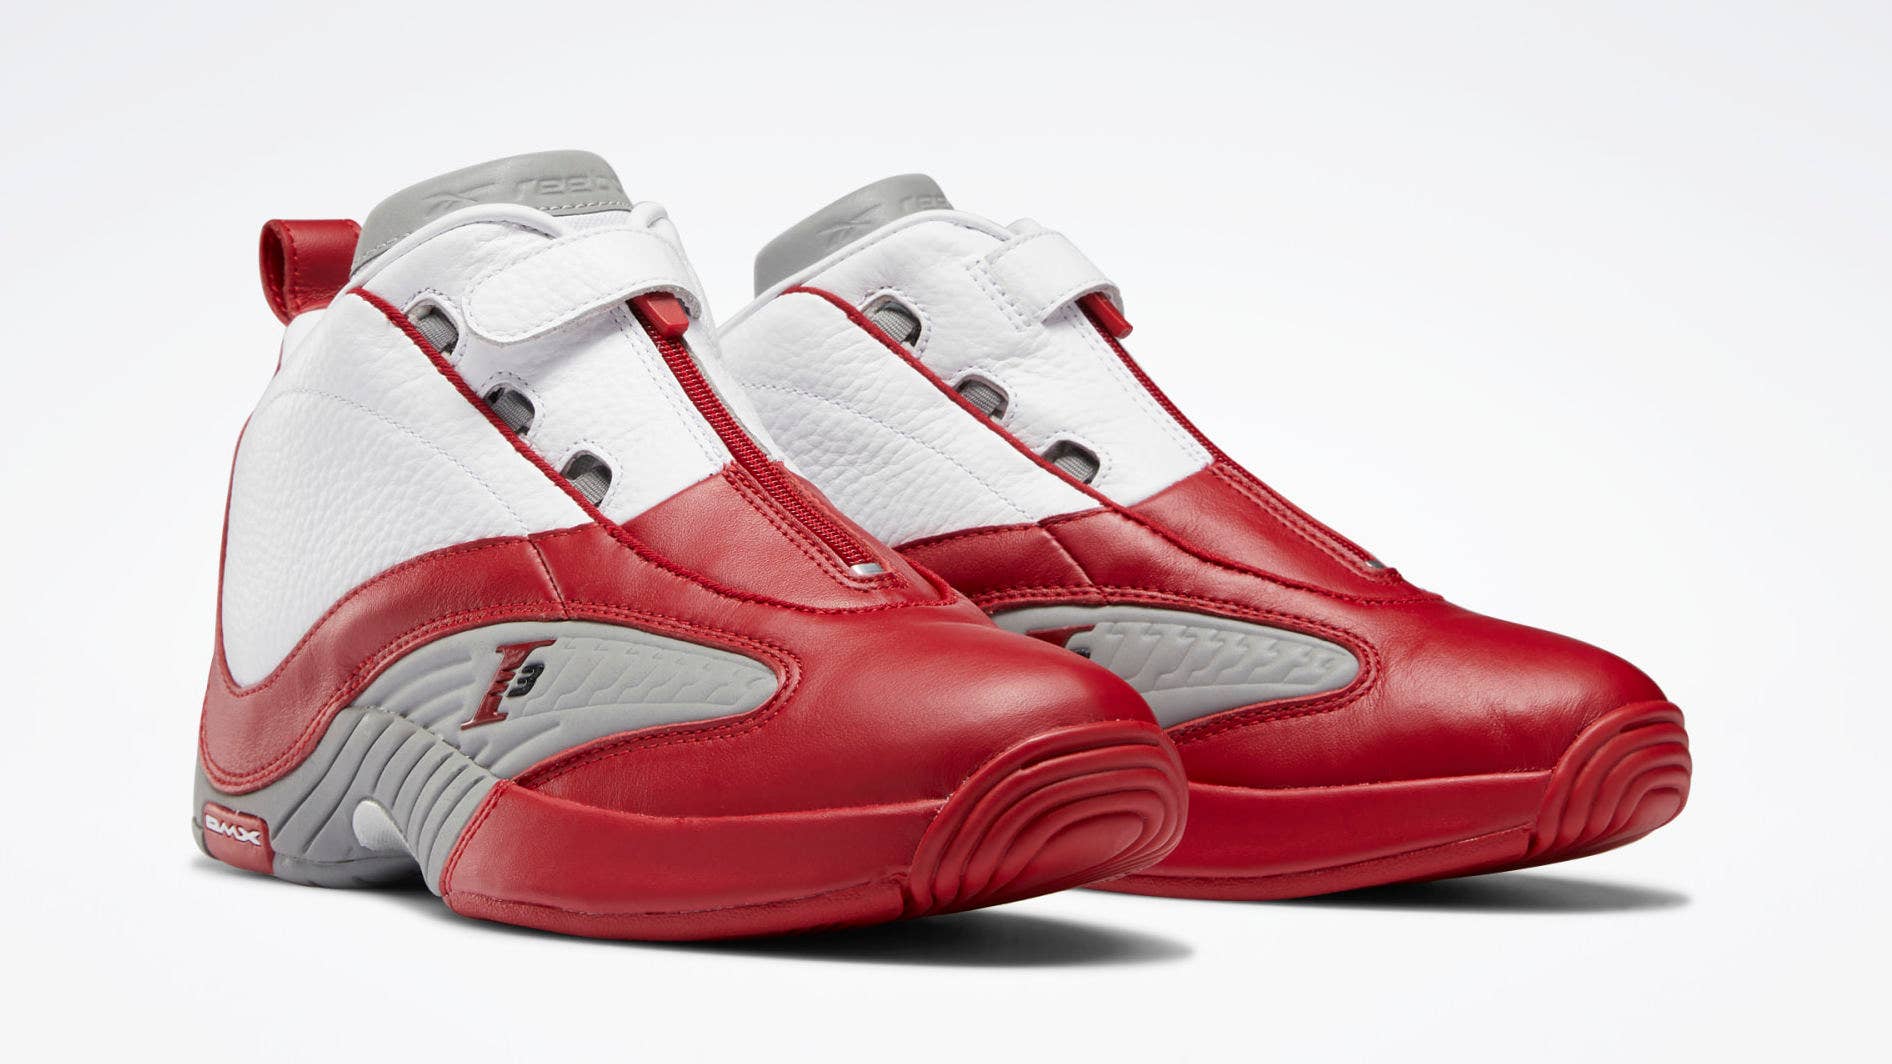 Reebok Question 4 'White/Red' FY9690 Pair